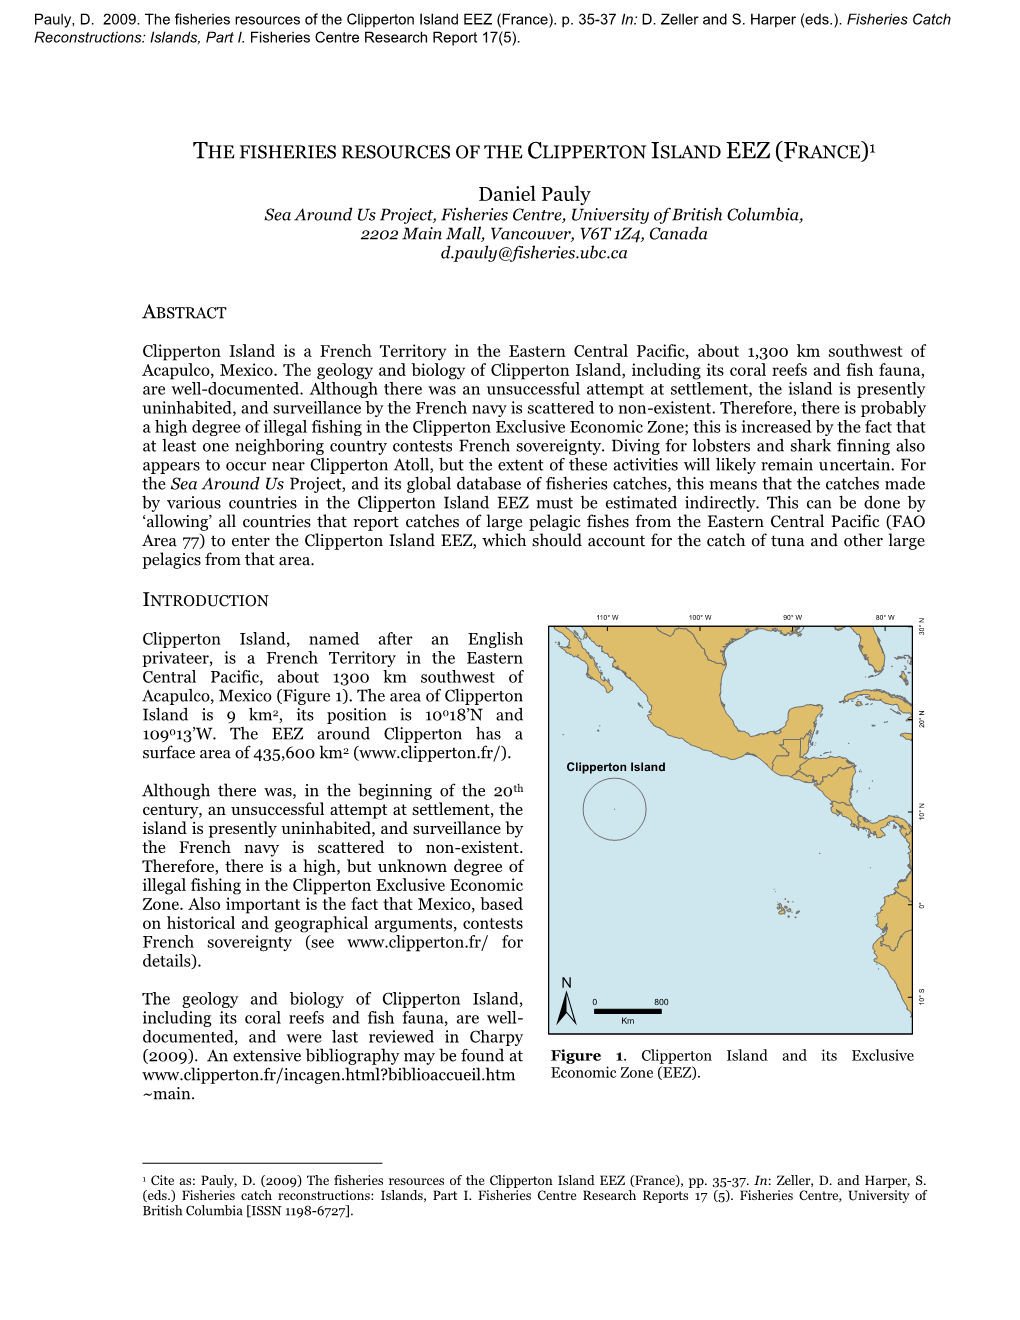 The Fisheries Resources of Clipperton Island (France)